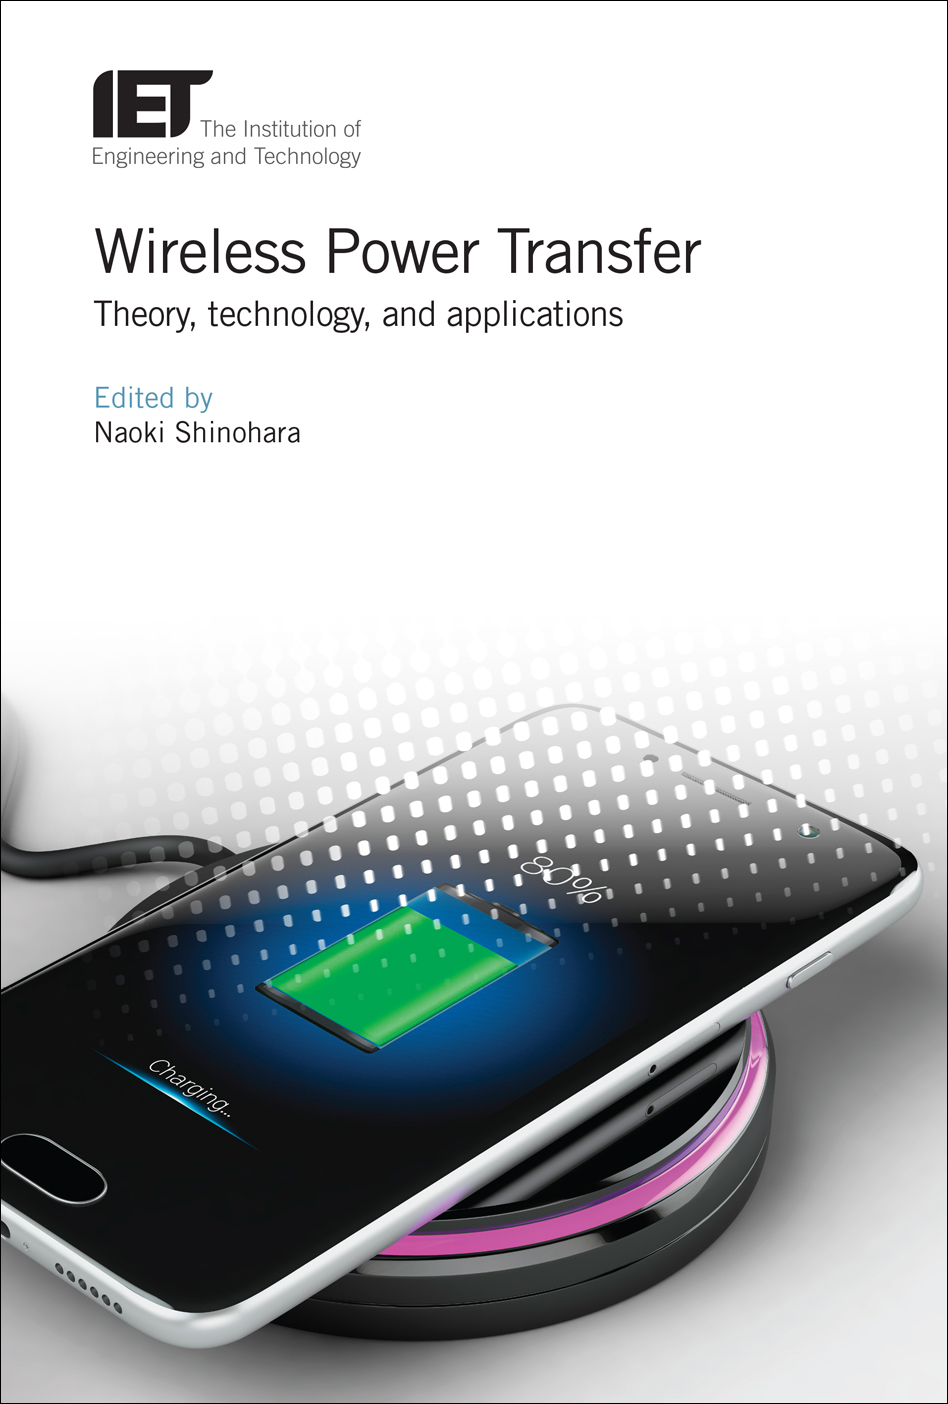 Wireless Power Transfer, Theory, technology, and applications